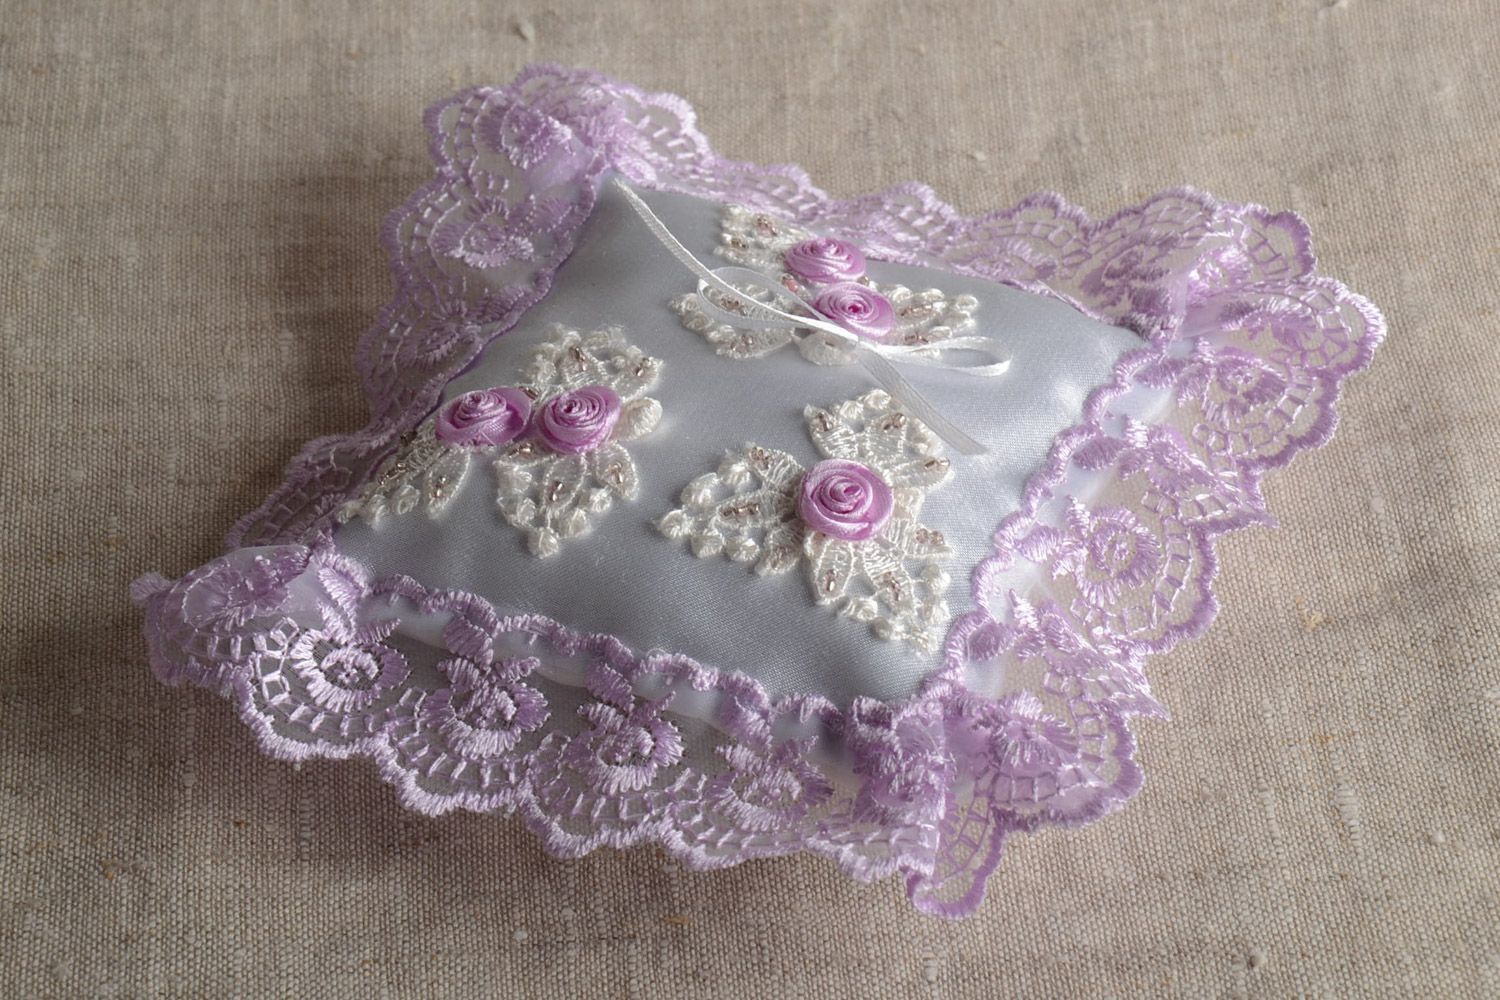 Handmade wedding rings pillow with lace and beads in white and lavender colors photo 1